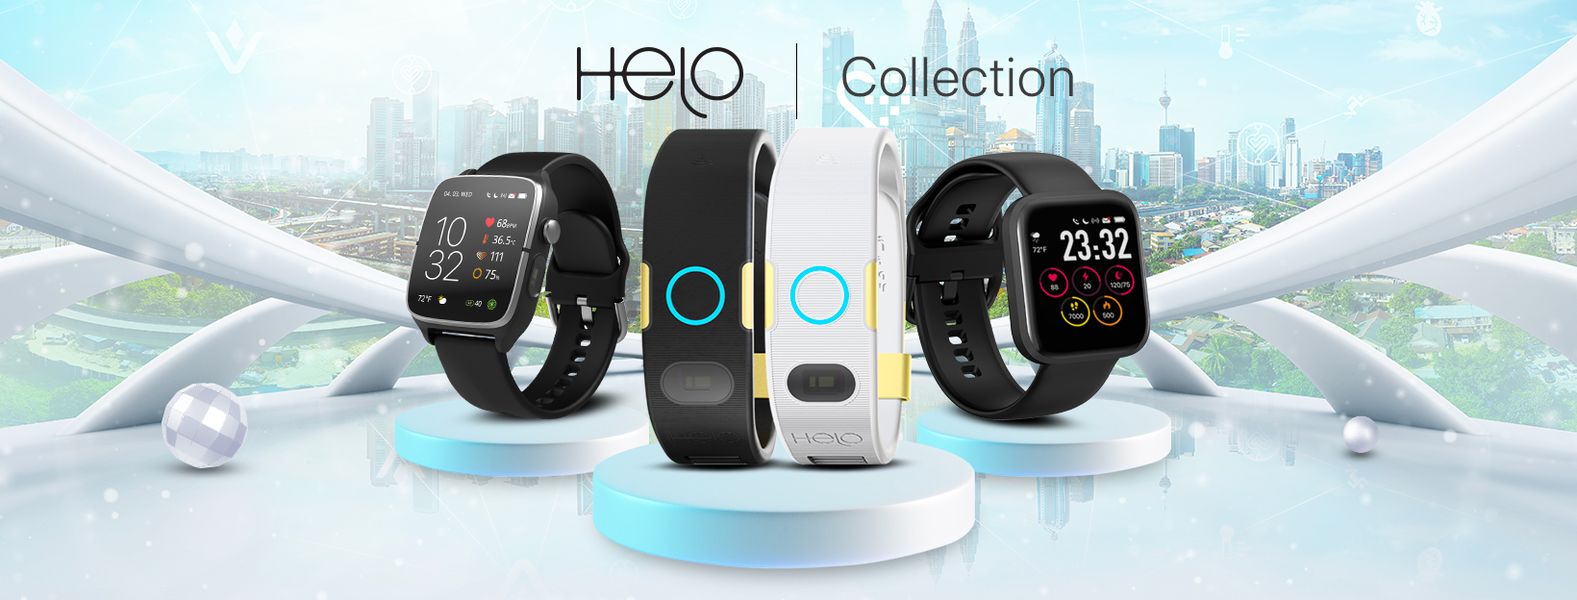 crypto mining smartwatches and biosense bands from helo and inpersona